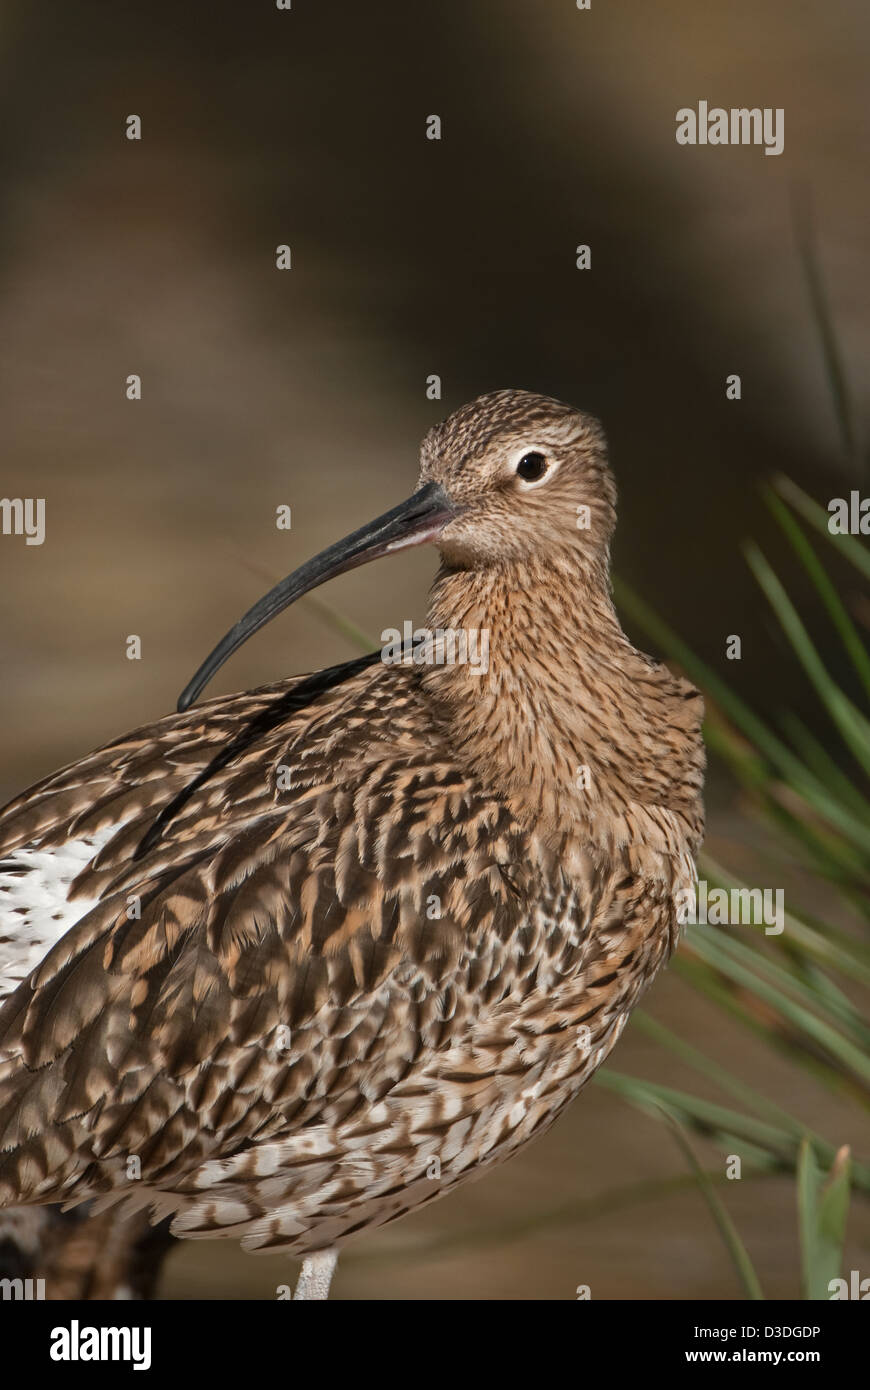 Adult Common Curlew pausing during preening Stock Photo